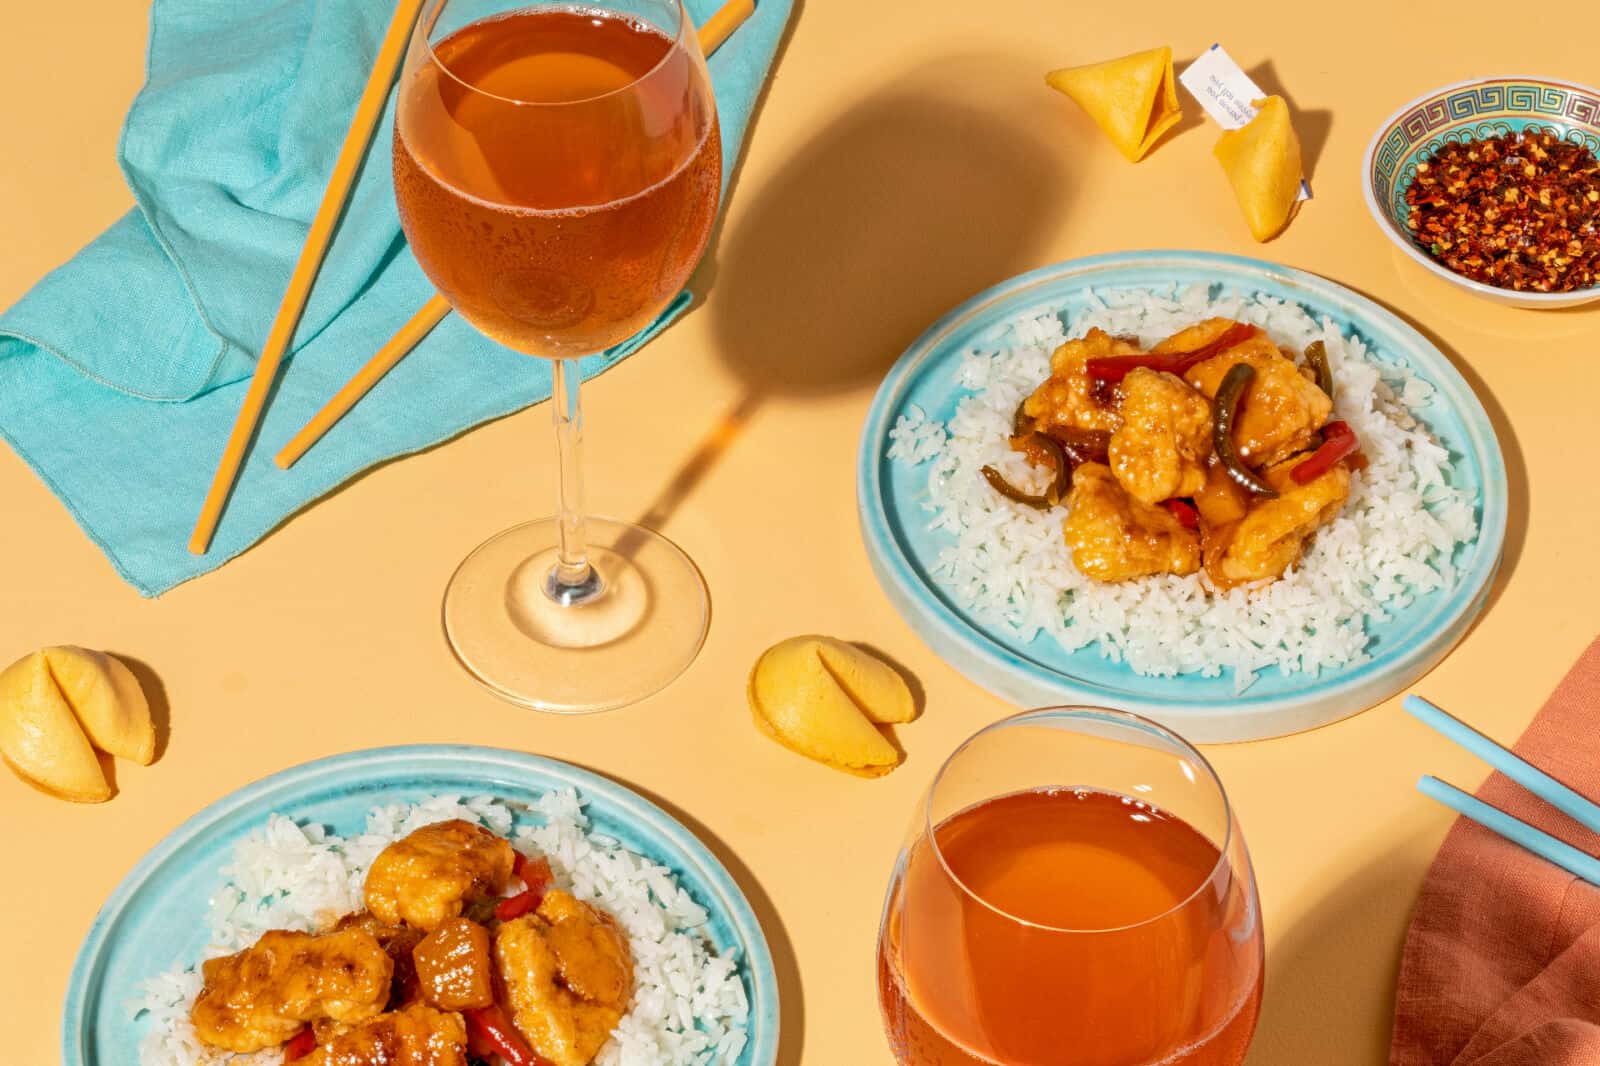 cider and Chinese food pairings